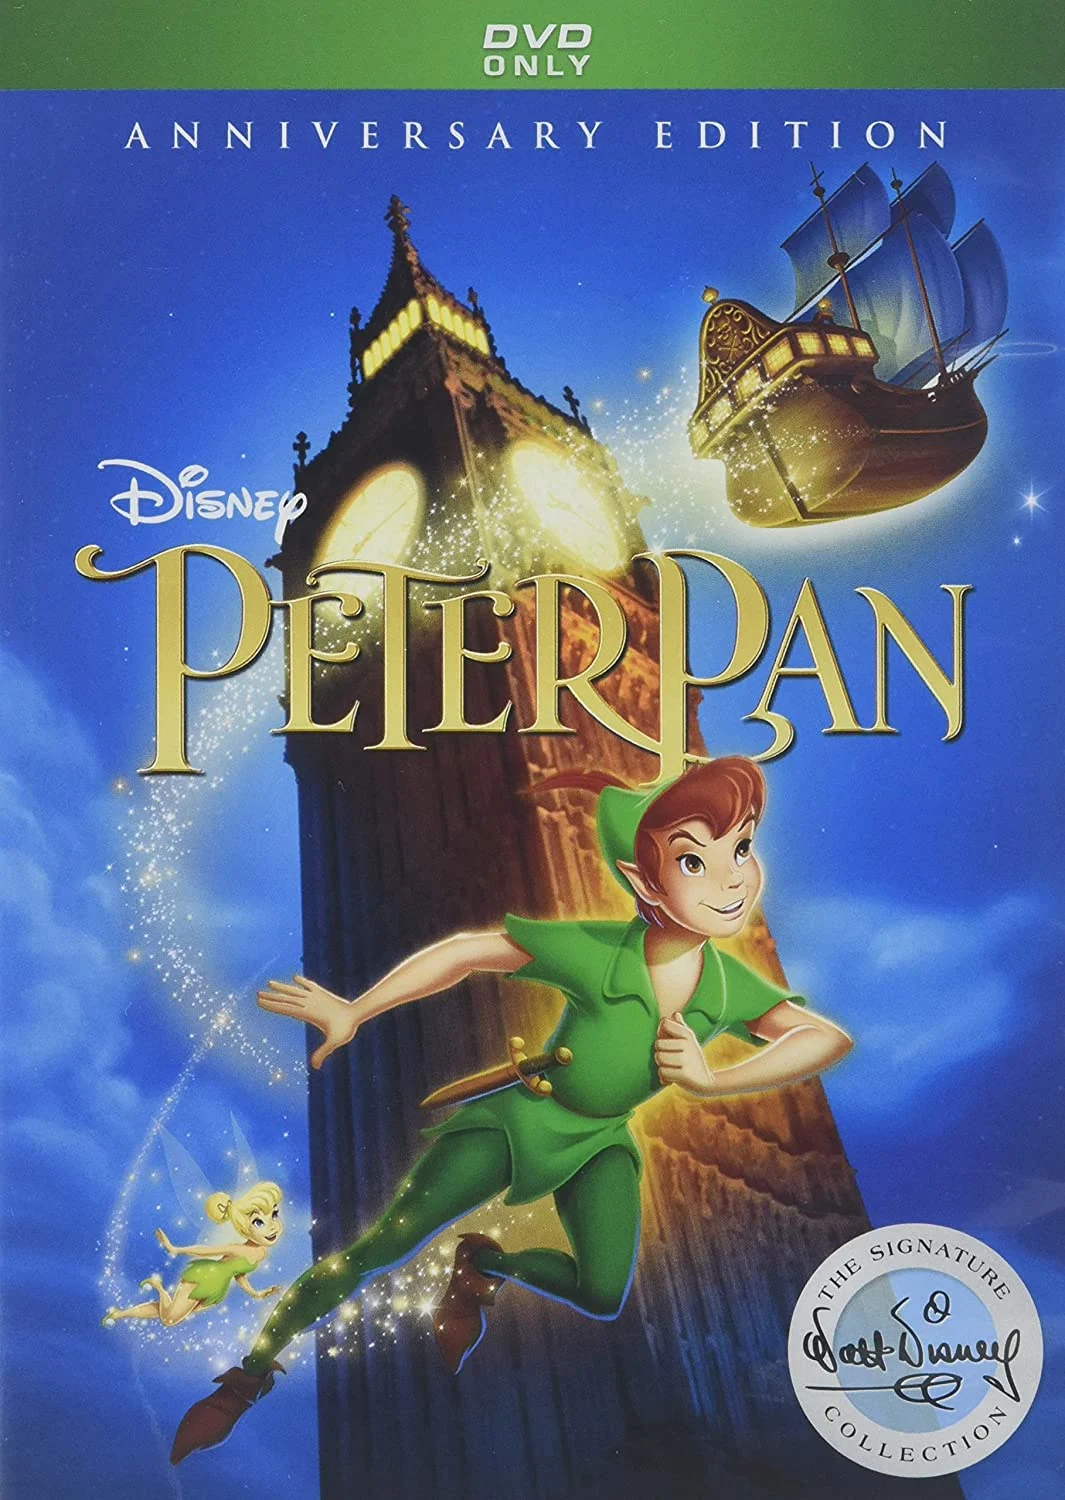 Peter Pan Signature Collection (2018) (DVD) on MovieShack